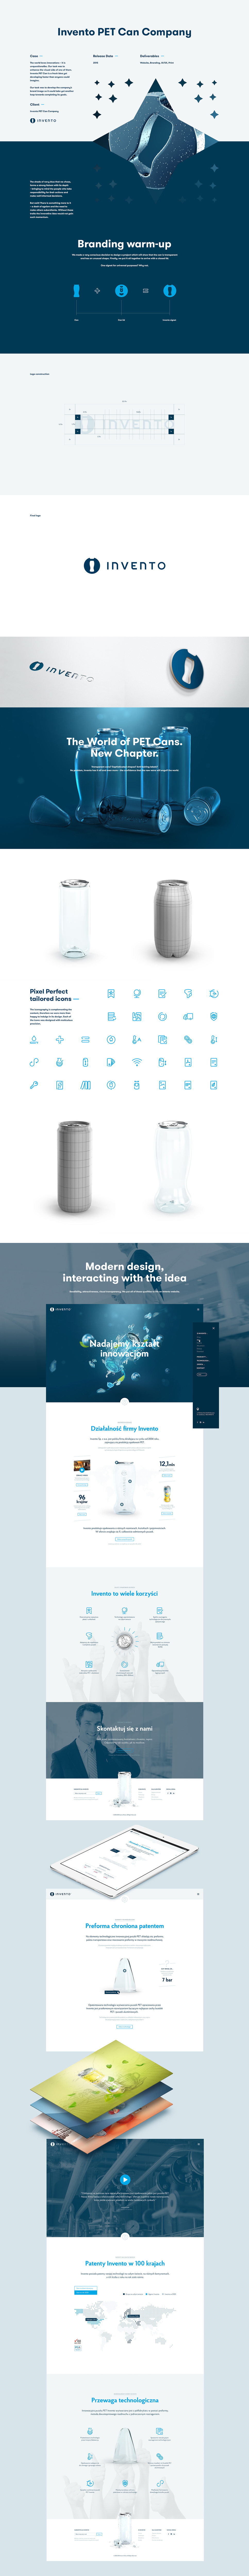 invento Web Webdesign UI ux design logo brand 3D can bottle Pet ID stationary icons